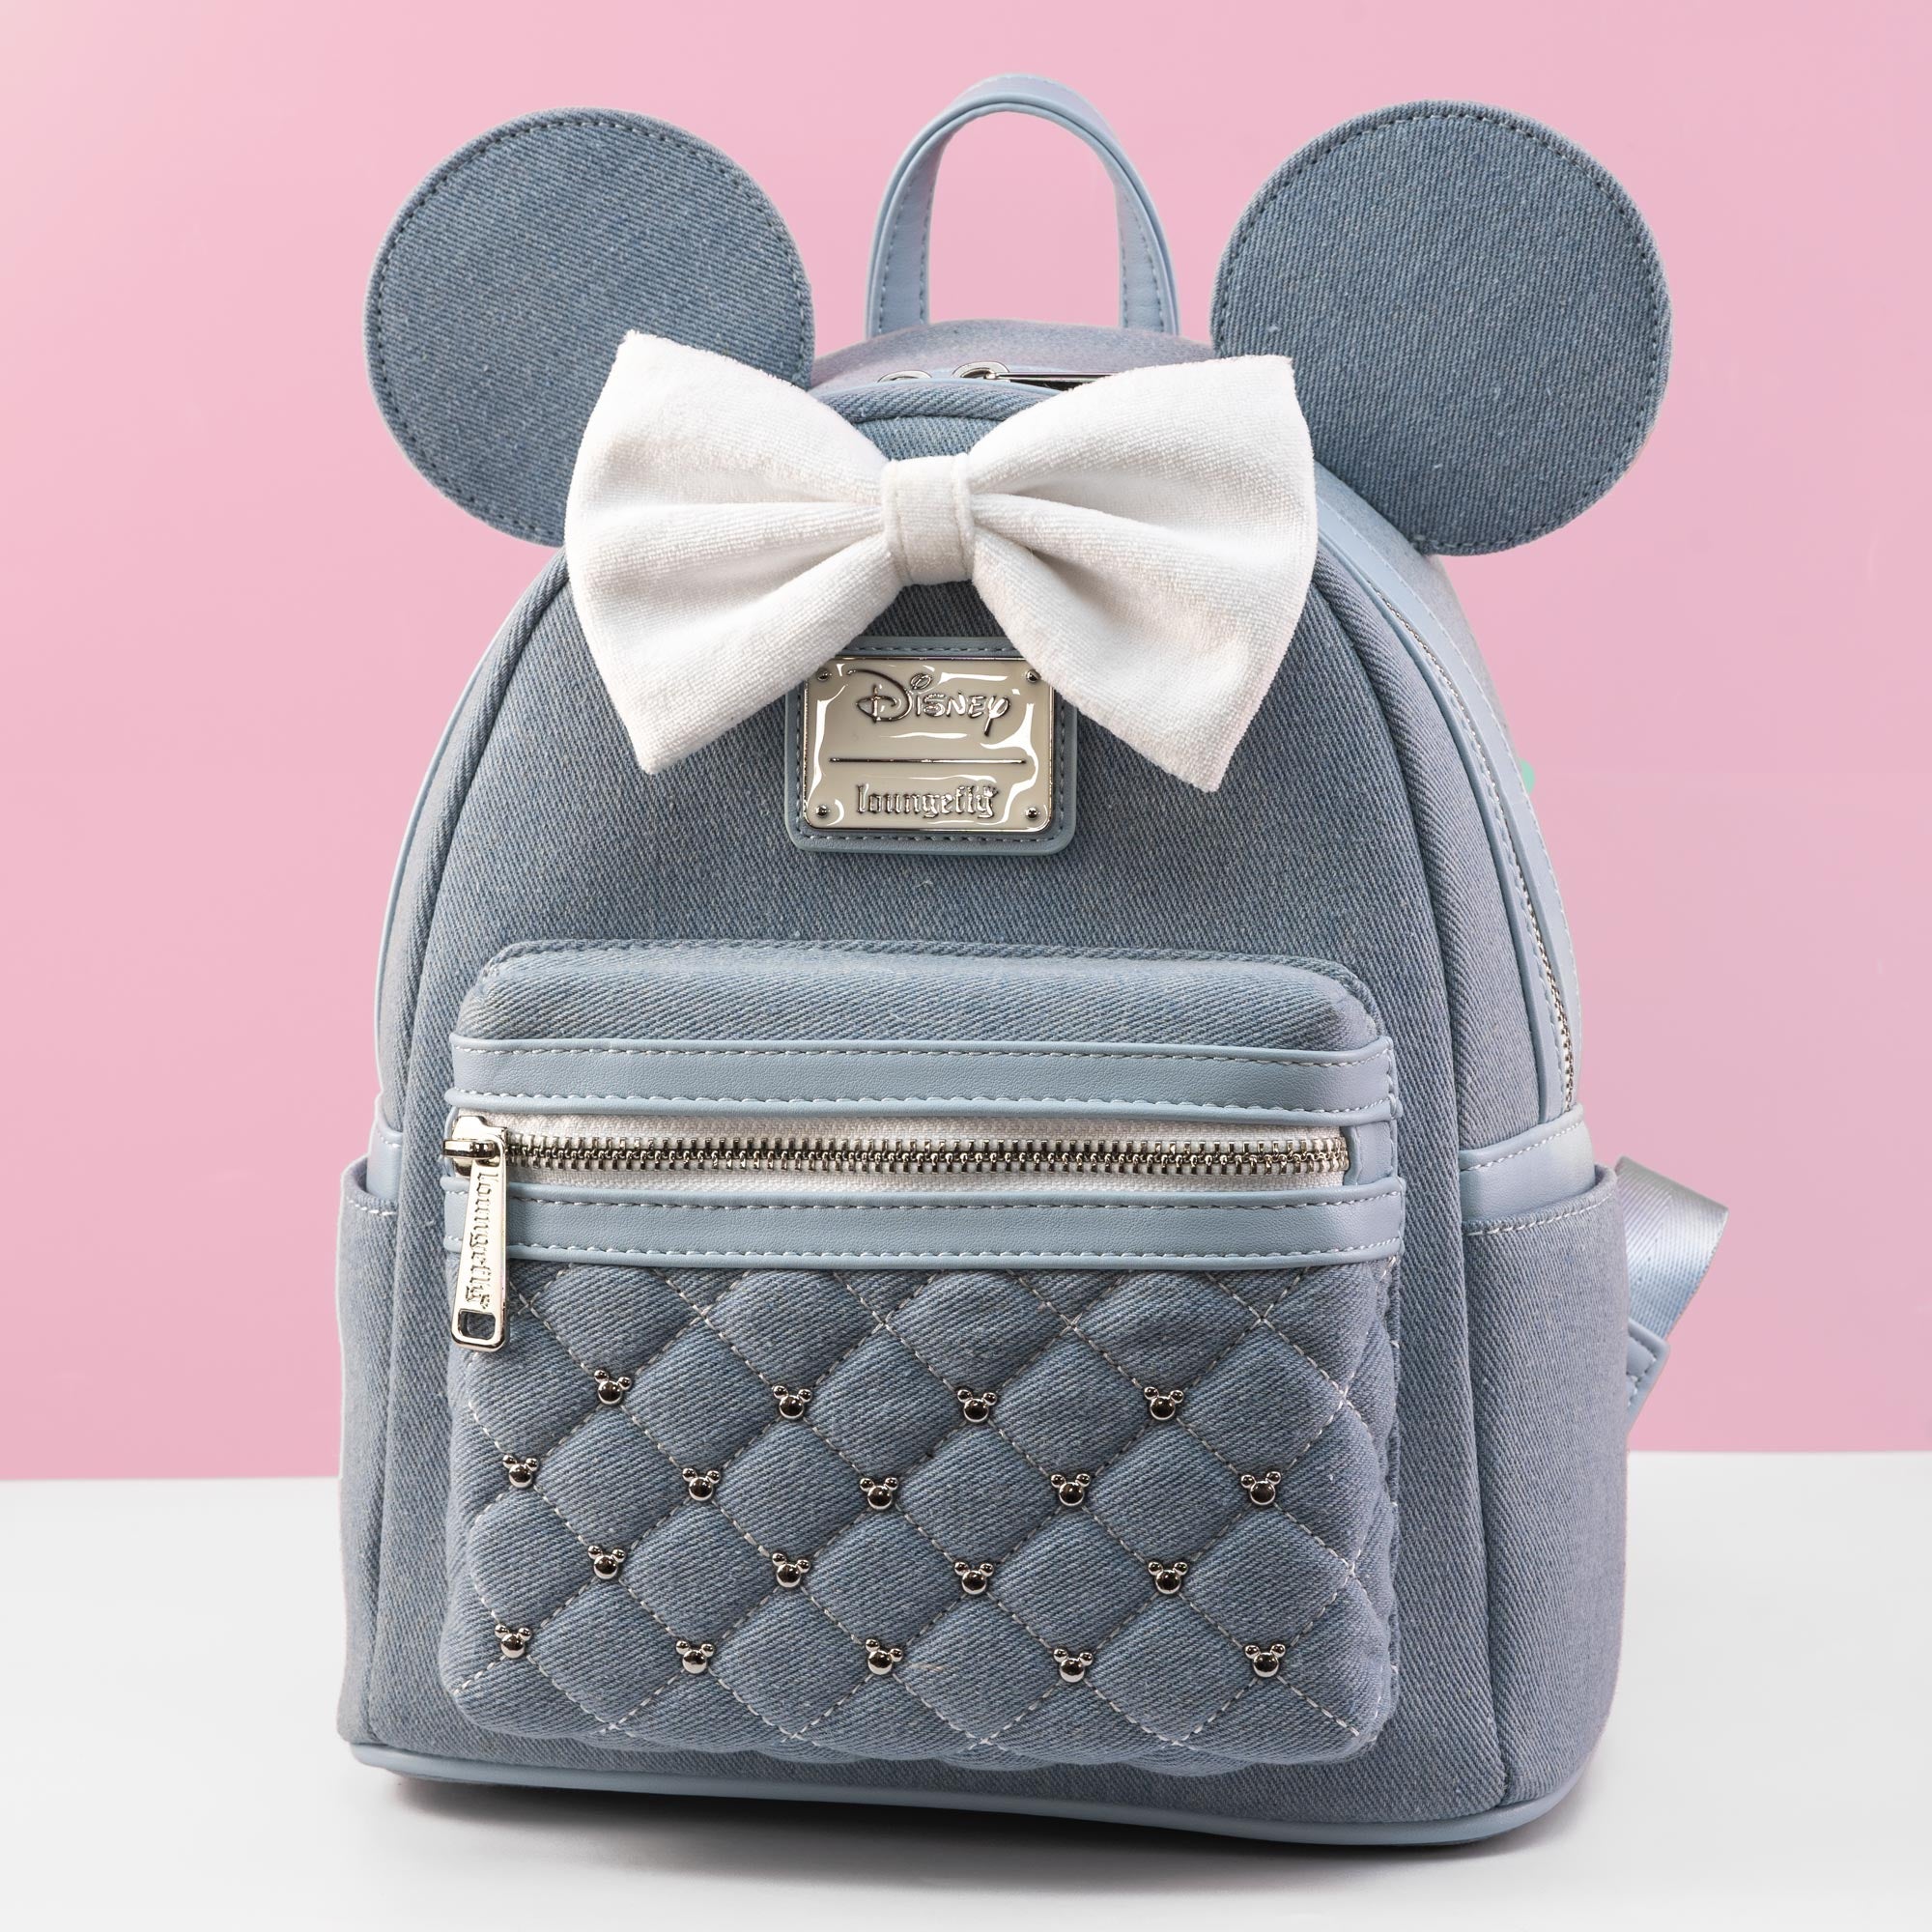 Loungefly x Disney Minnie Mouse Denim Quilted Mini Backpack